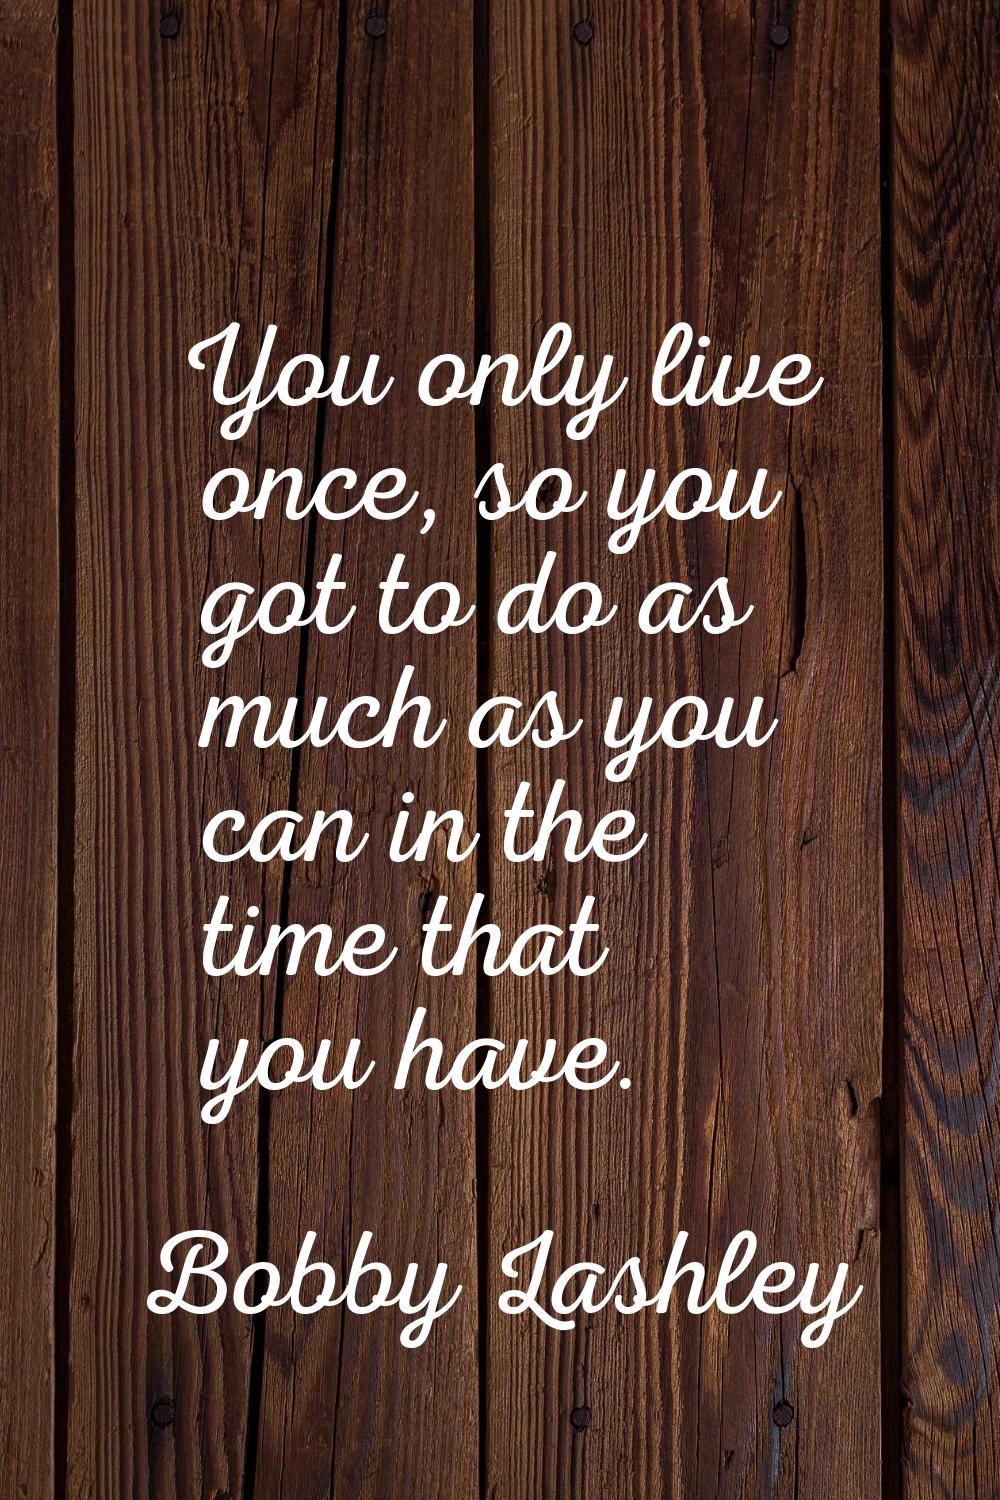 You only live once, so you got to do as much as you can in the time that you have.